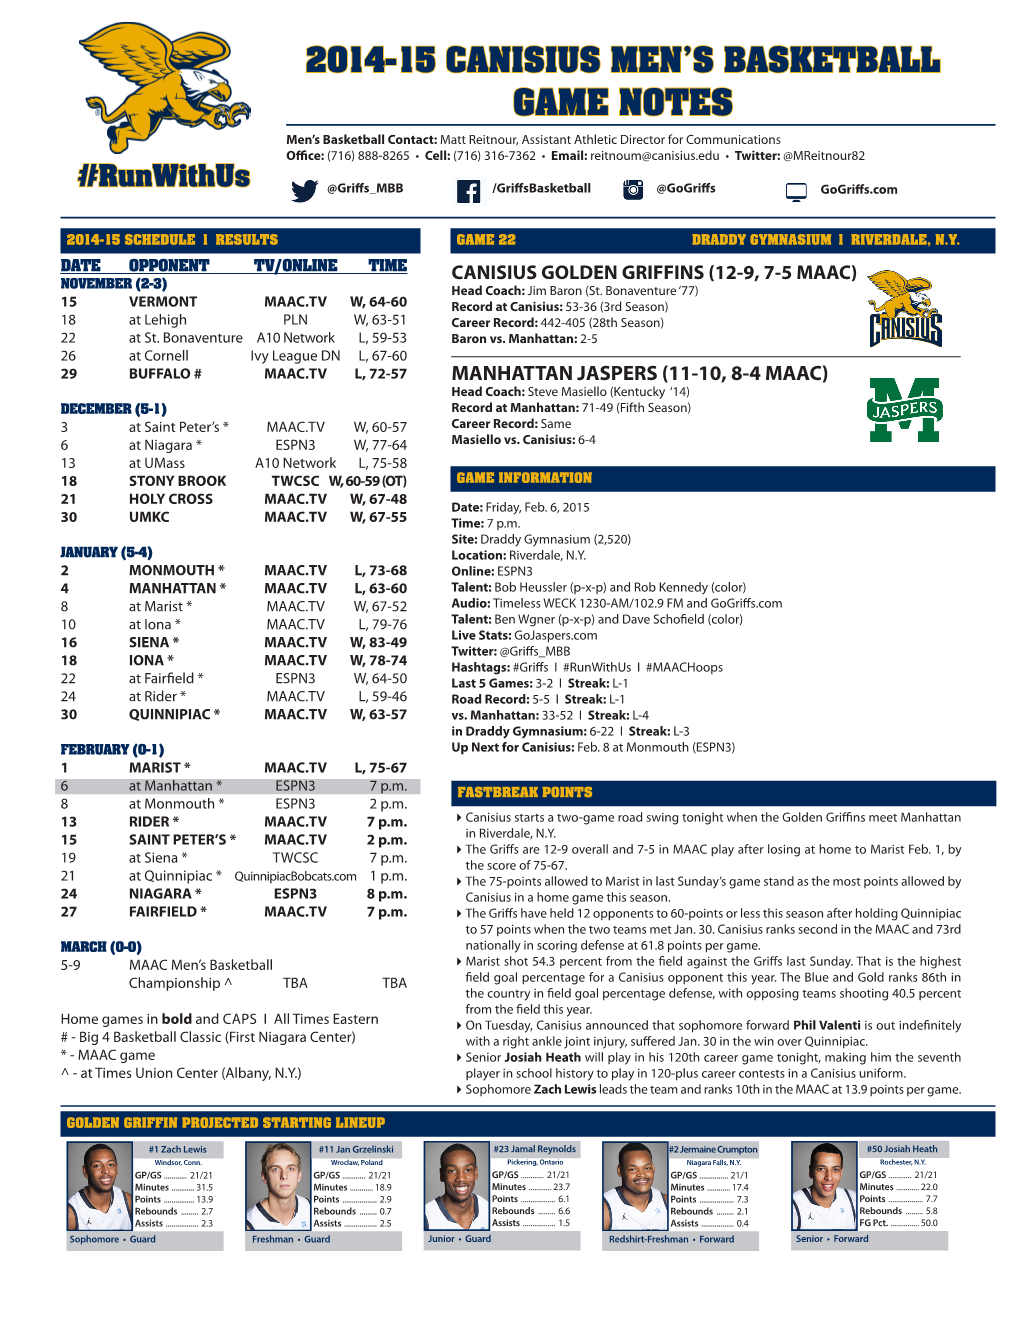 Canisius Men's Basketball Game Notes